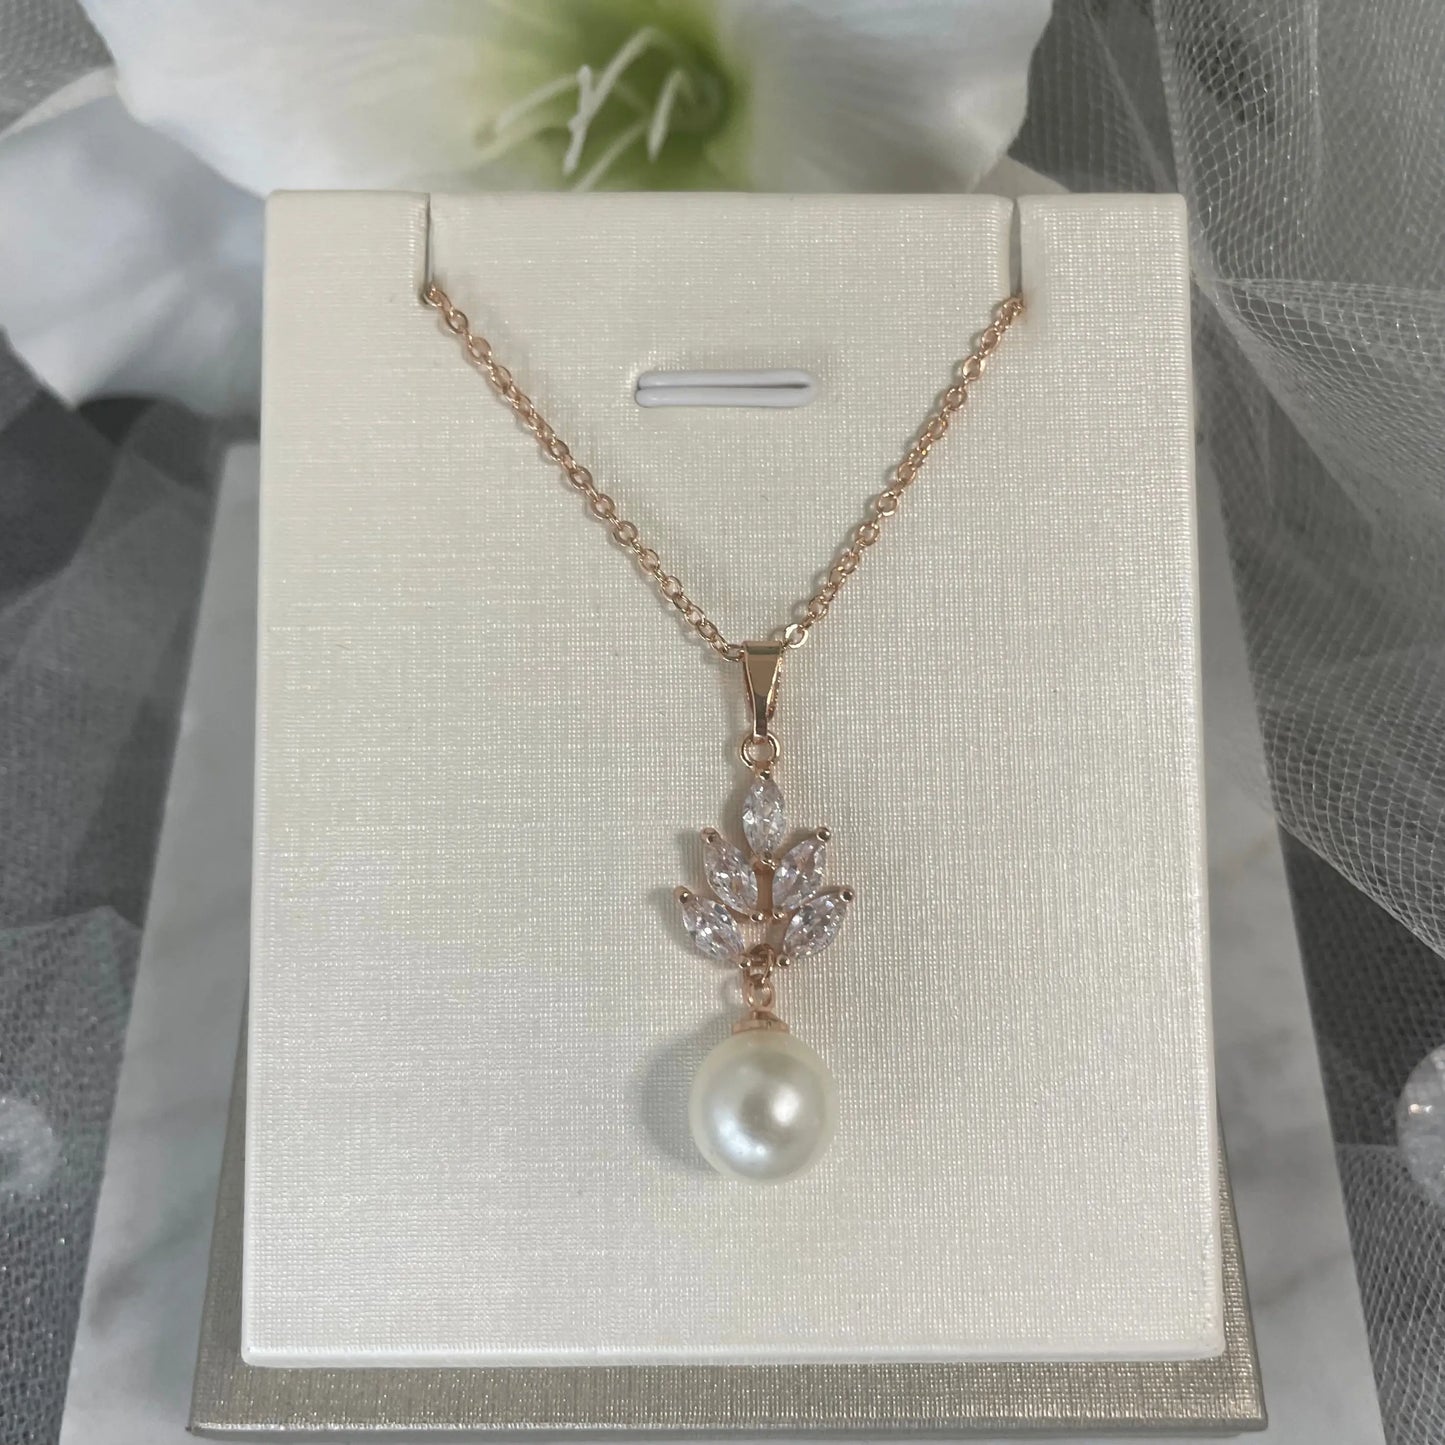 Necklace in Rose Gold: A stunning rose gold necklace with a leaf design and a teardrop pearl pendant.